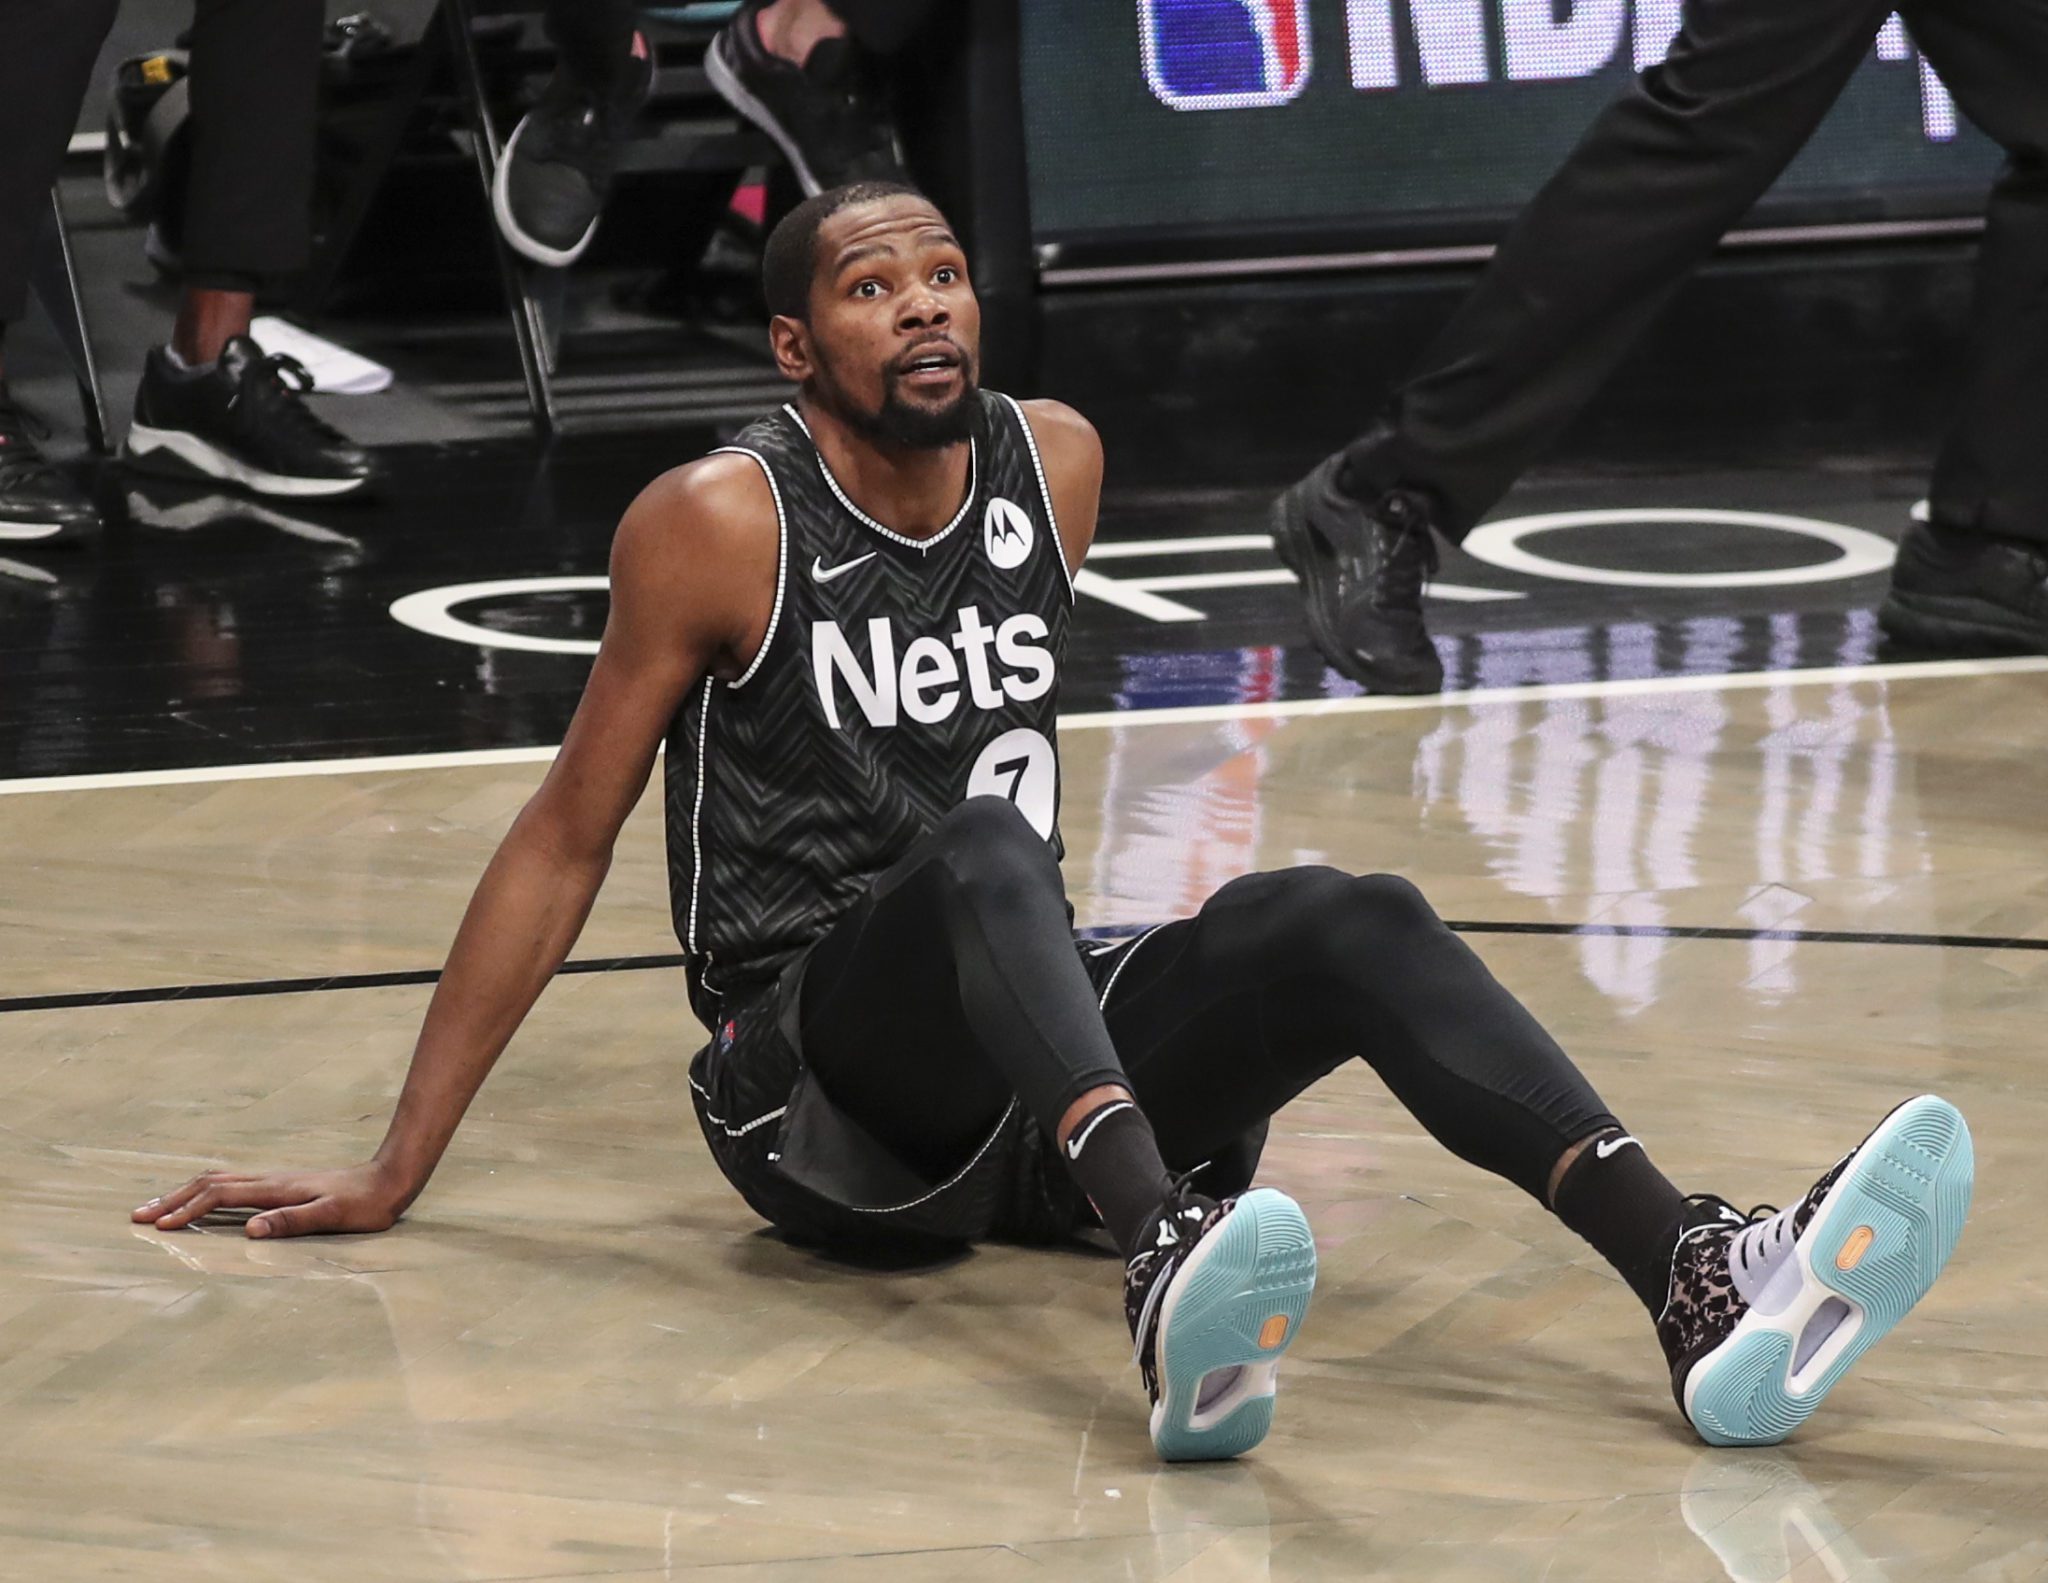 Officials Admit Kevin Durant Should Have Been Ejected For Throwing Ball Into Stands